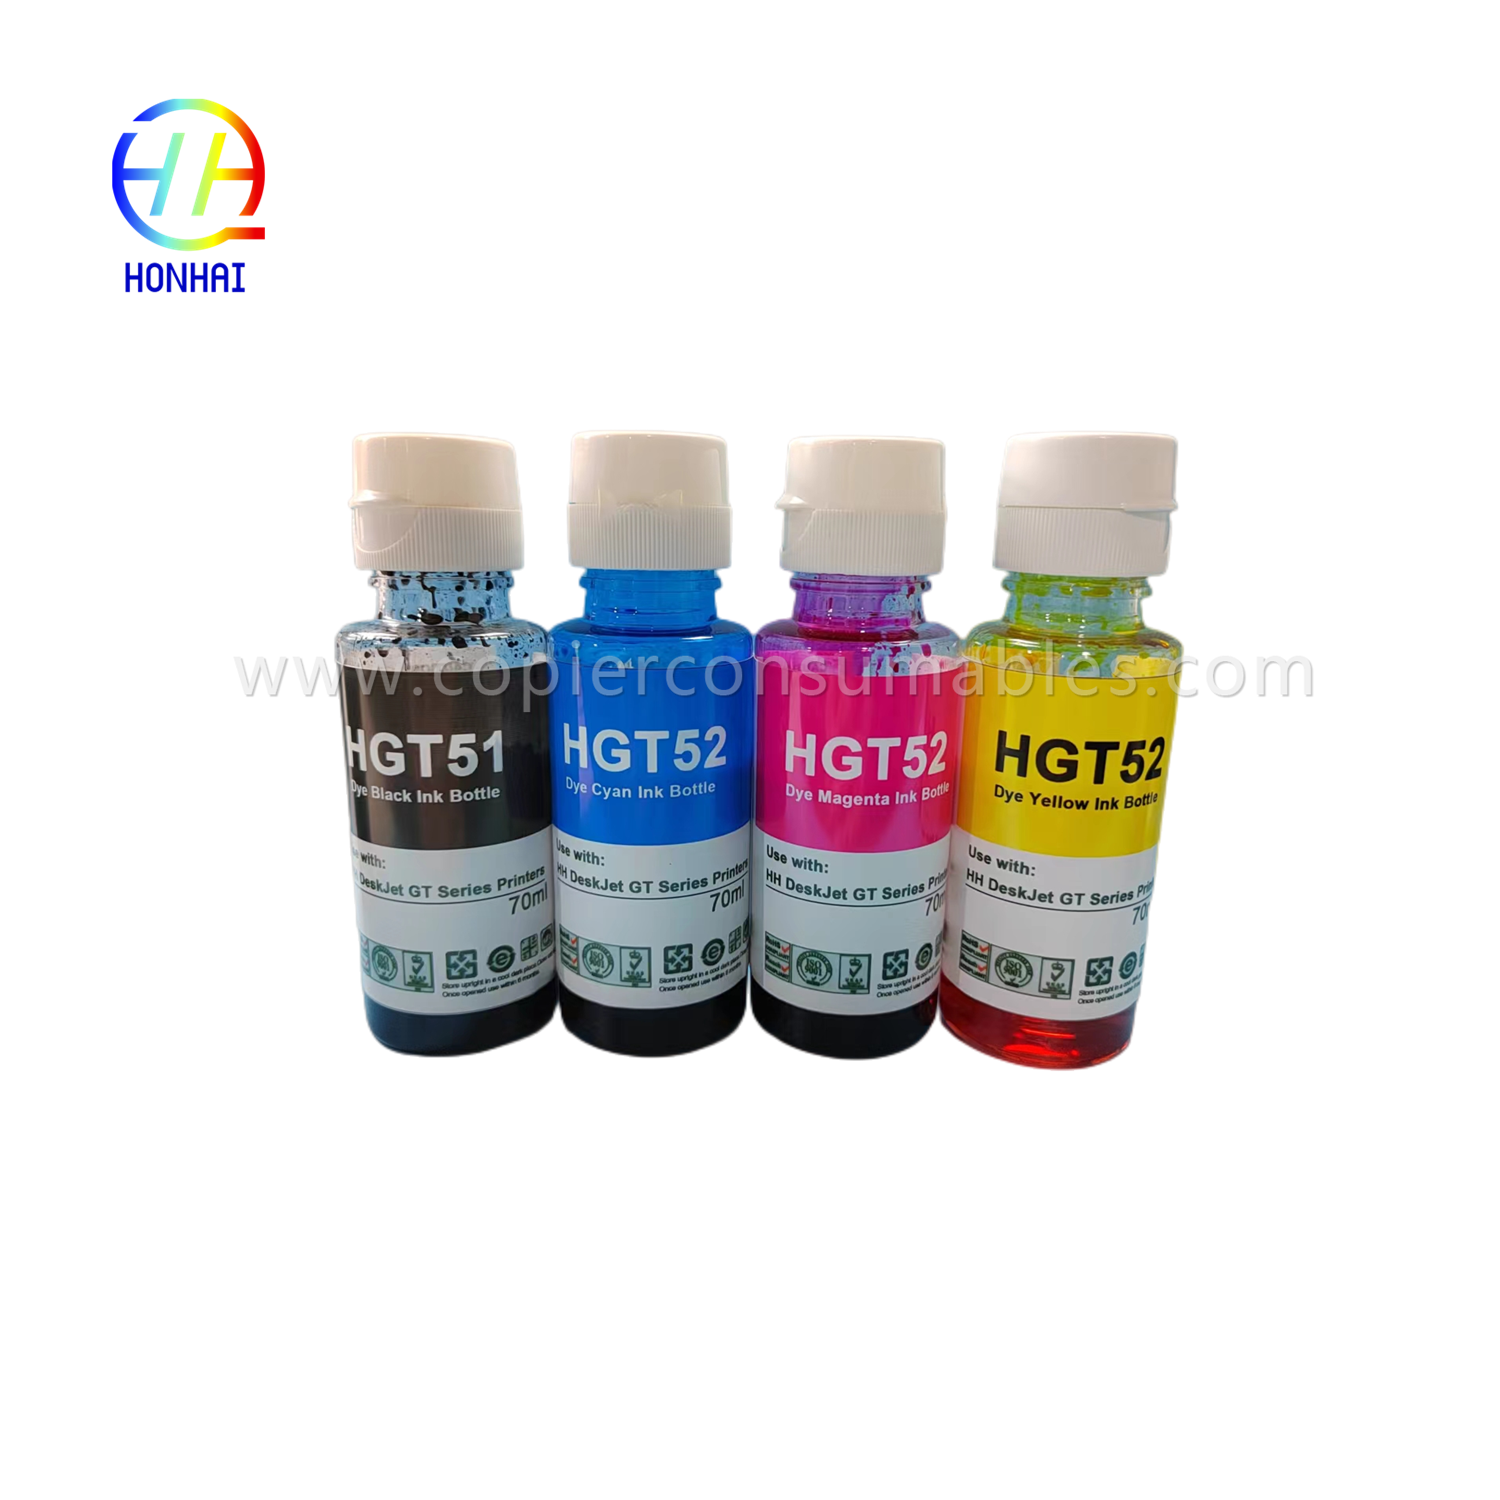 https://www.copierconsumables.com/ink-bottle-for-hp-gt51-gt52-519-511-510-518-411-410-531-672-5820-product/